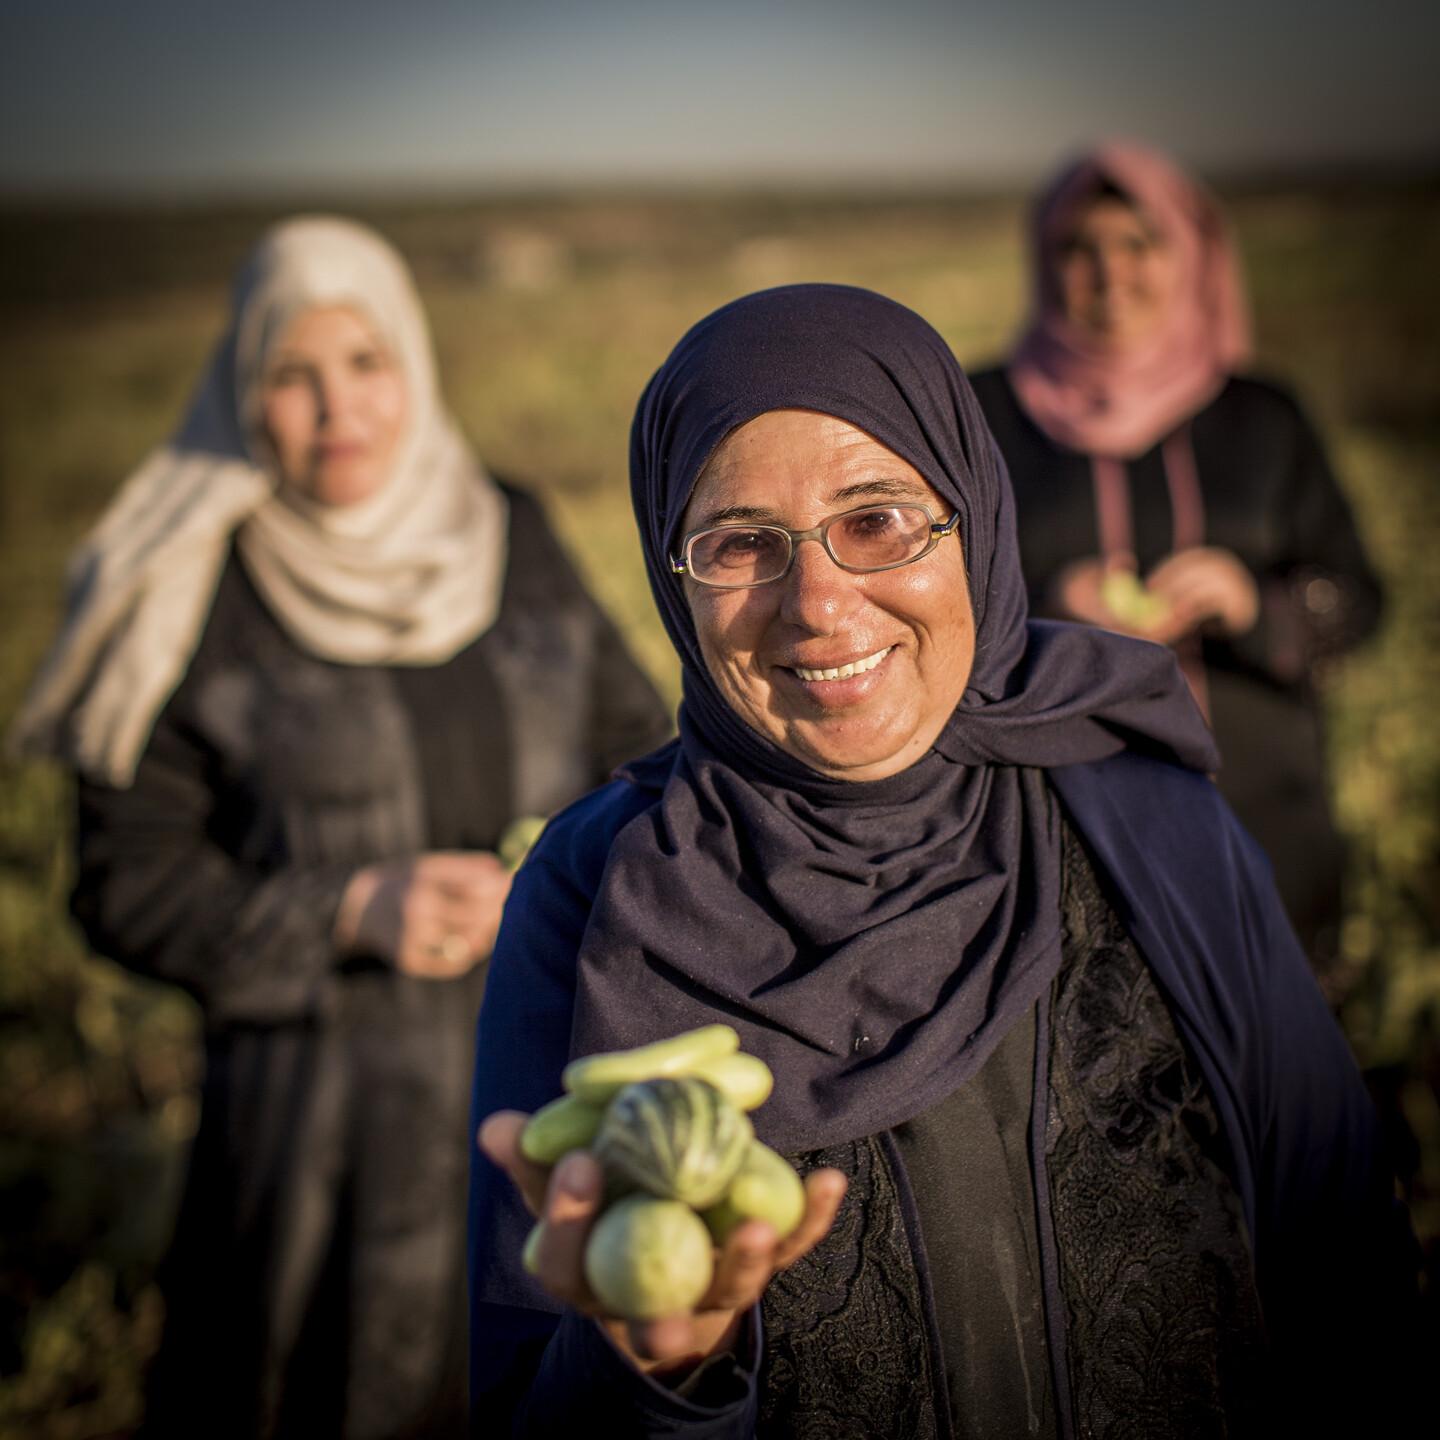 Ibtisam Mousa is a member and one of the leaders of the We Effect-backed cooperative in the village of Deir Ballout.